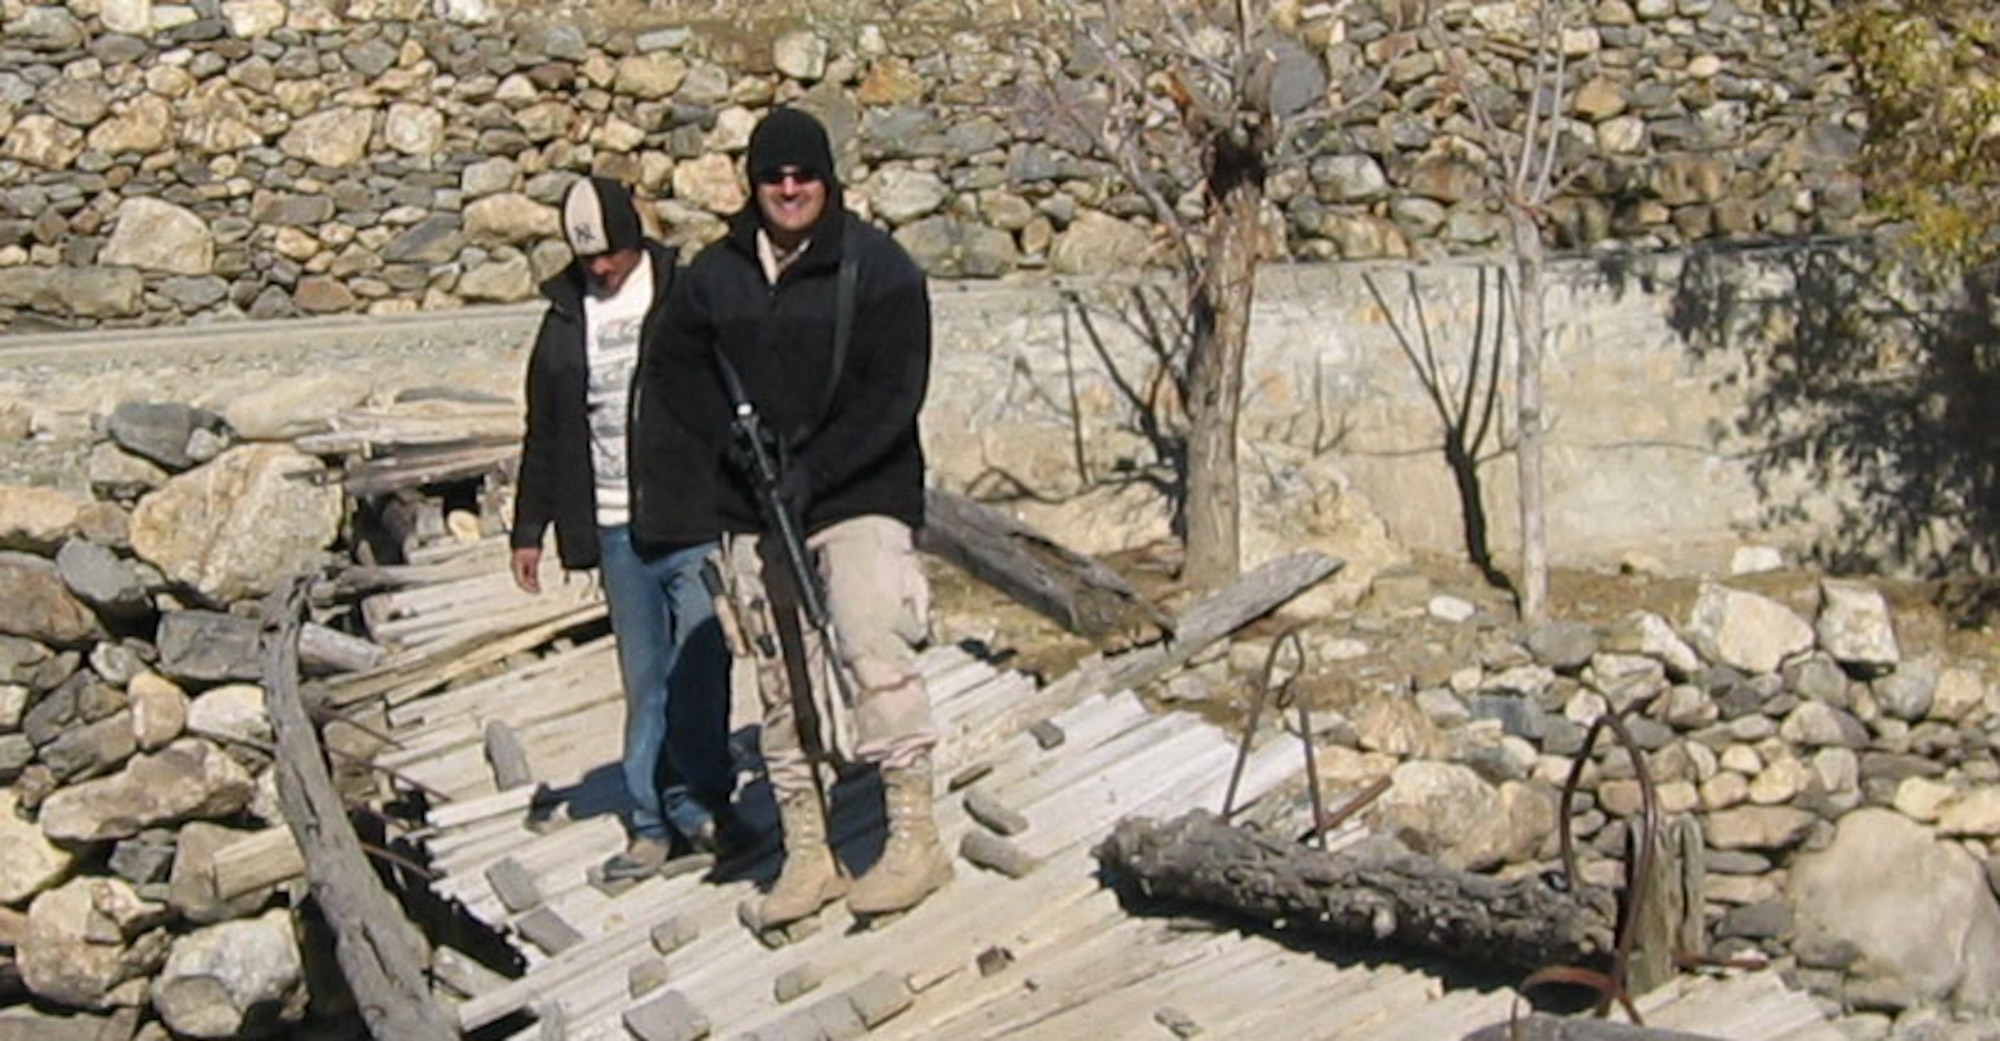 Staff Sgt. Chad Louis and an interpreter cross a broken bridge at the site of a future project to replace bridges in Rakh, Afgahnistan. Sergeant Louis and the interpreter
were members of a 25 person provincial reconstruction team stationed in Afgahnistan.